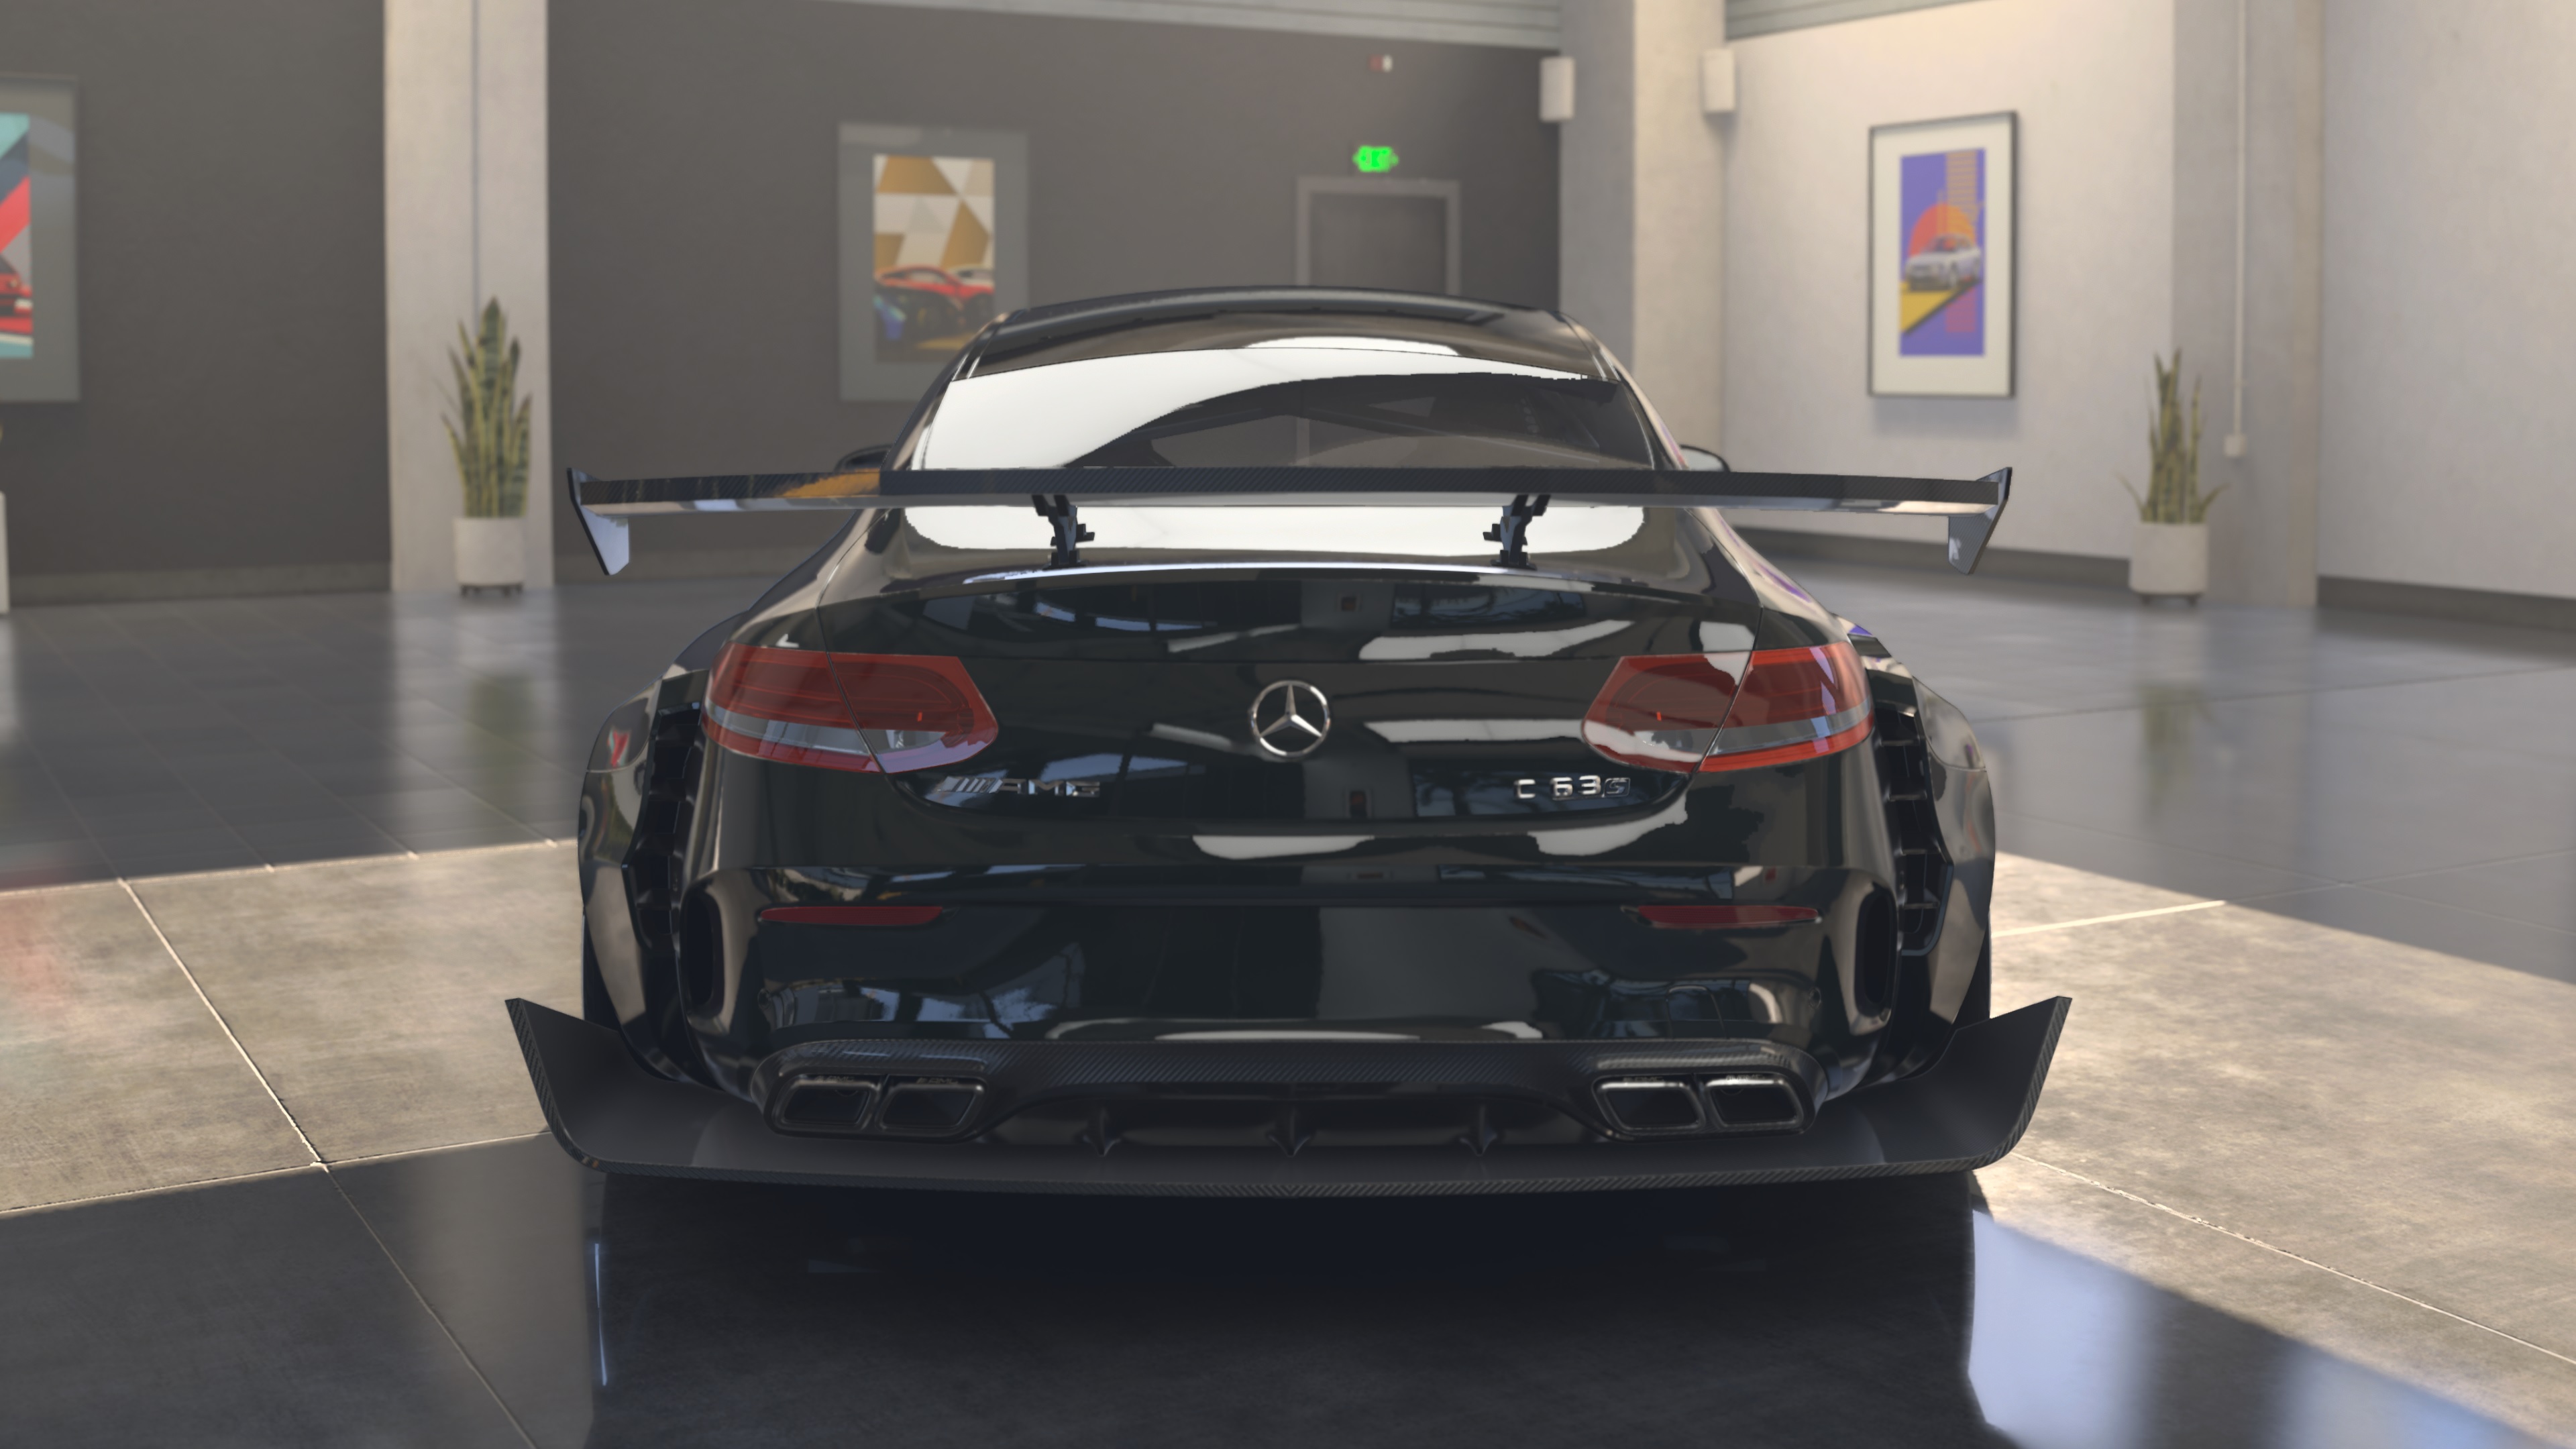 Mercedes-AMG C63 S Coupe Forza Edition in Forza Motorsport